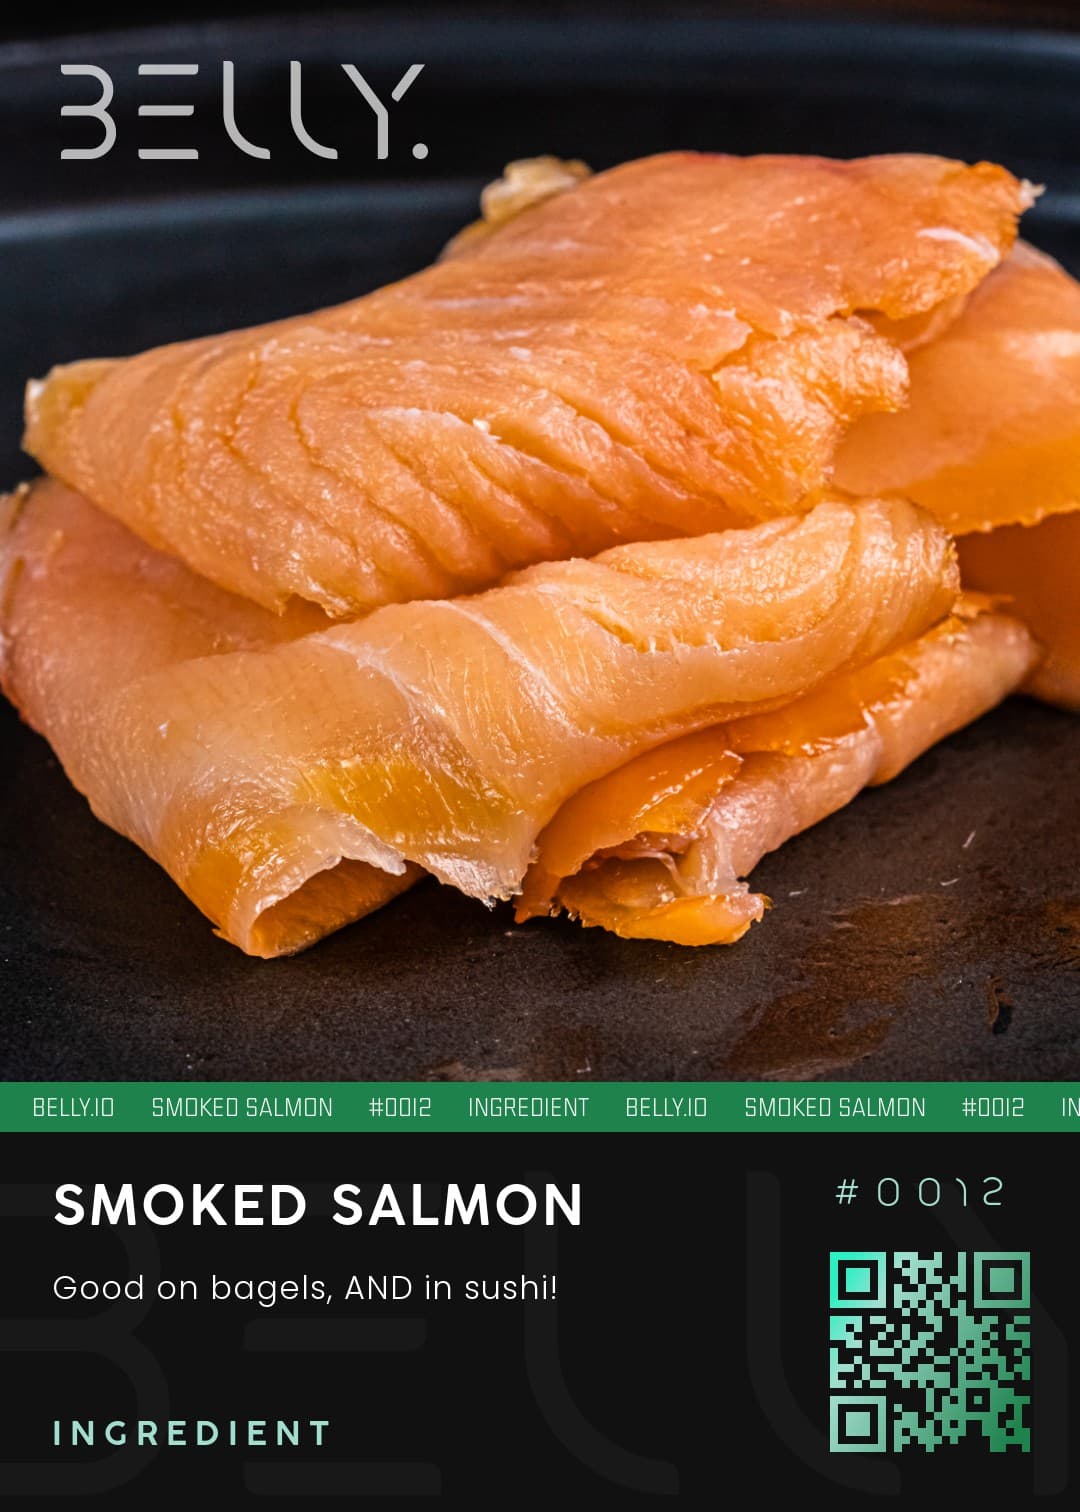 Smoked Salmon - Good on bagels, AND in sushi!